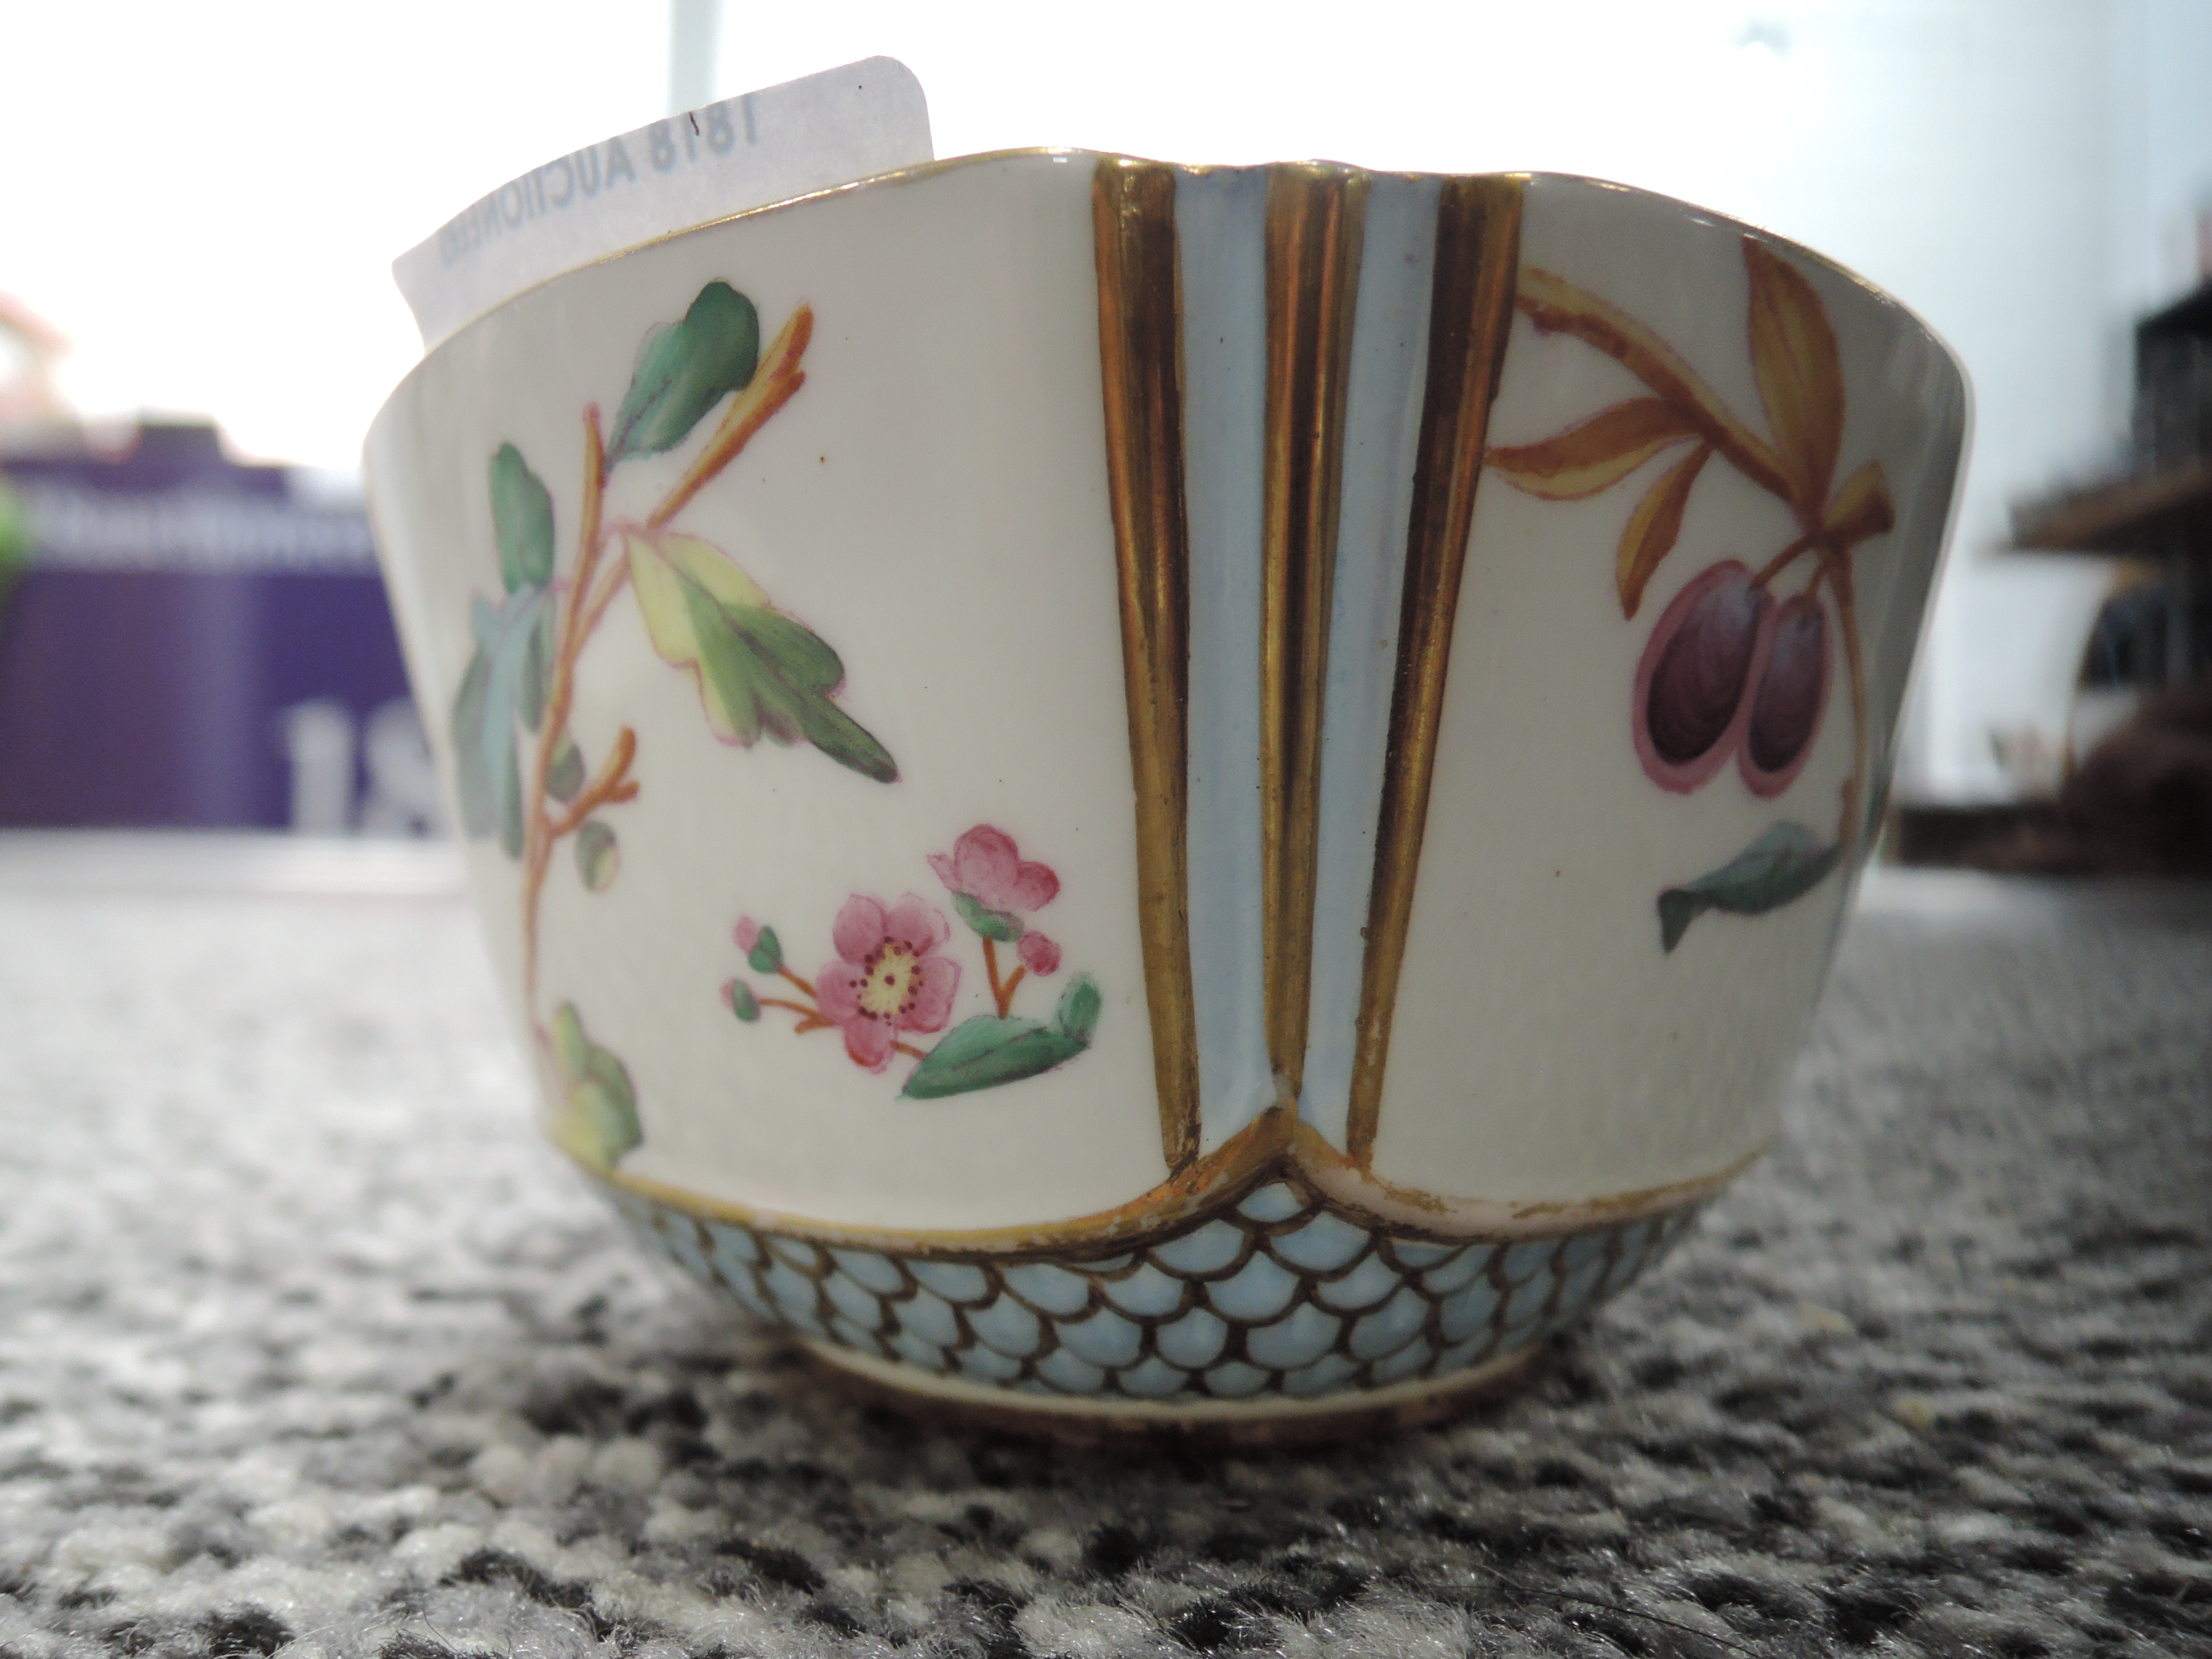 An exquisite tea cup and saucer set by Spode Copeland Pt no 3112 both pieces very good - Image 7 of 7